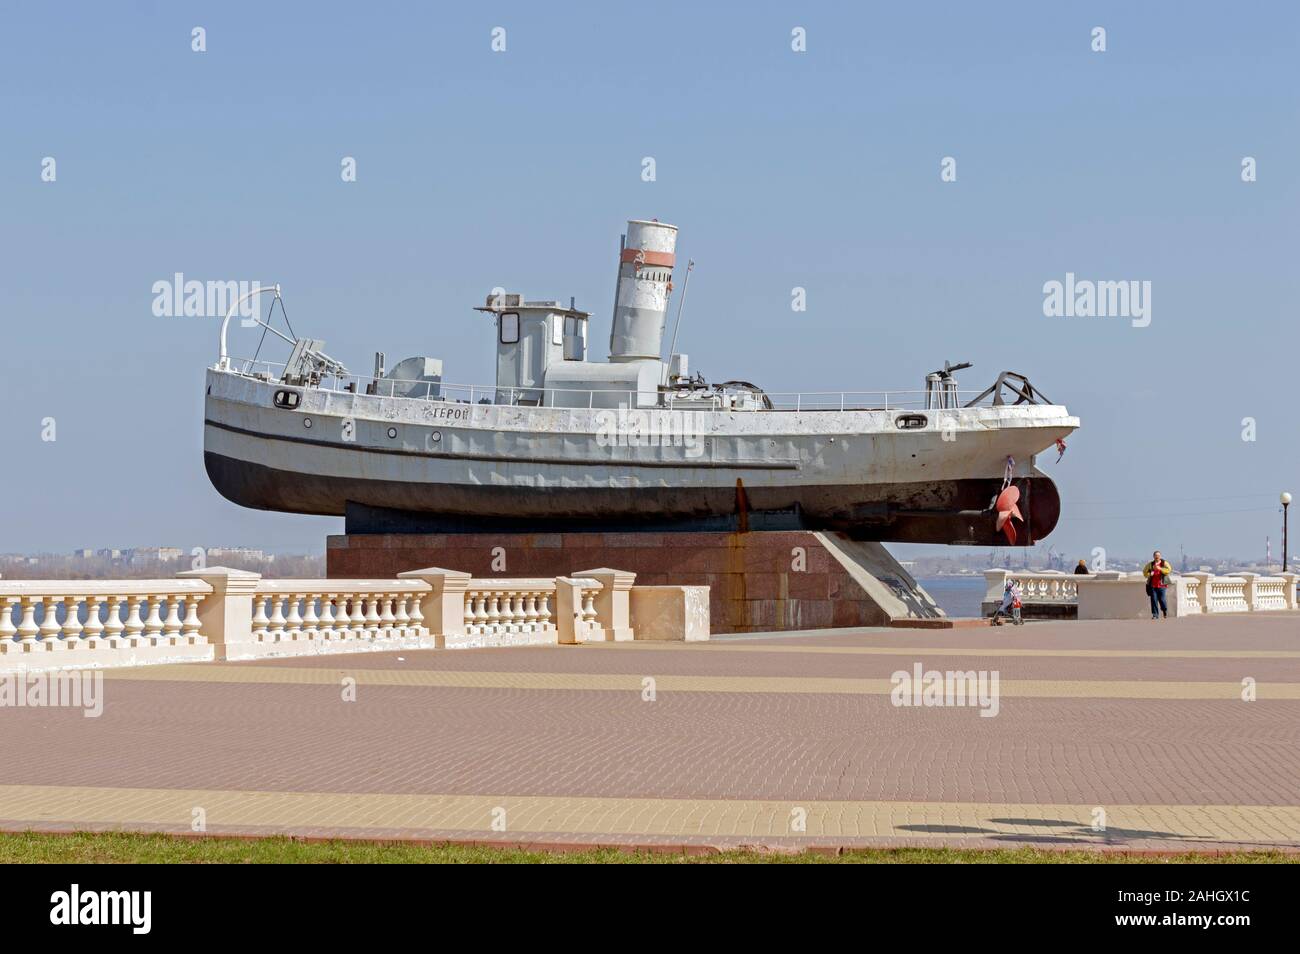 Boat on a pedestal in Nizhny Novgorod. Member of the Battle of Stalingrad. Monument to the soldiers. Stock Photo